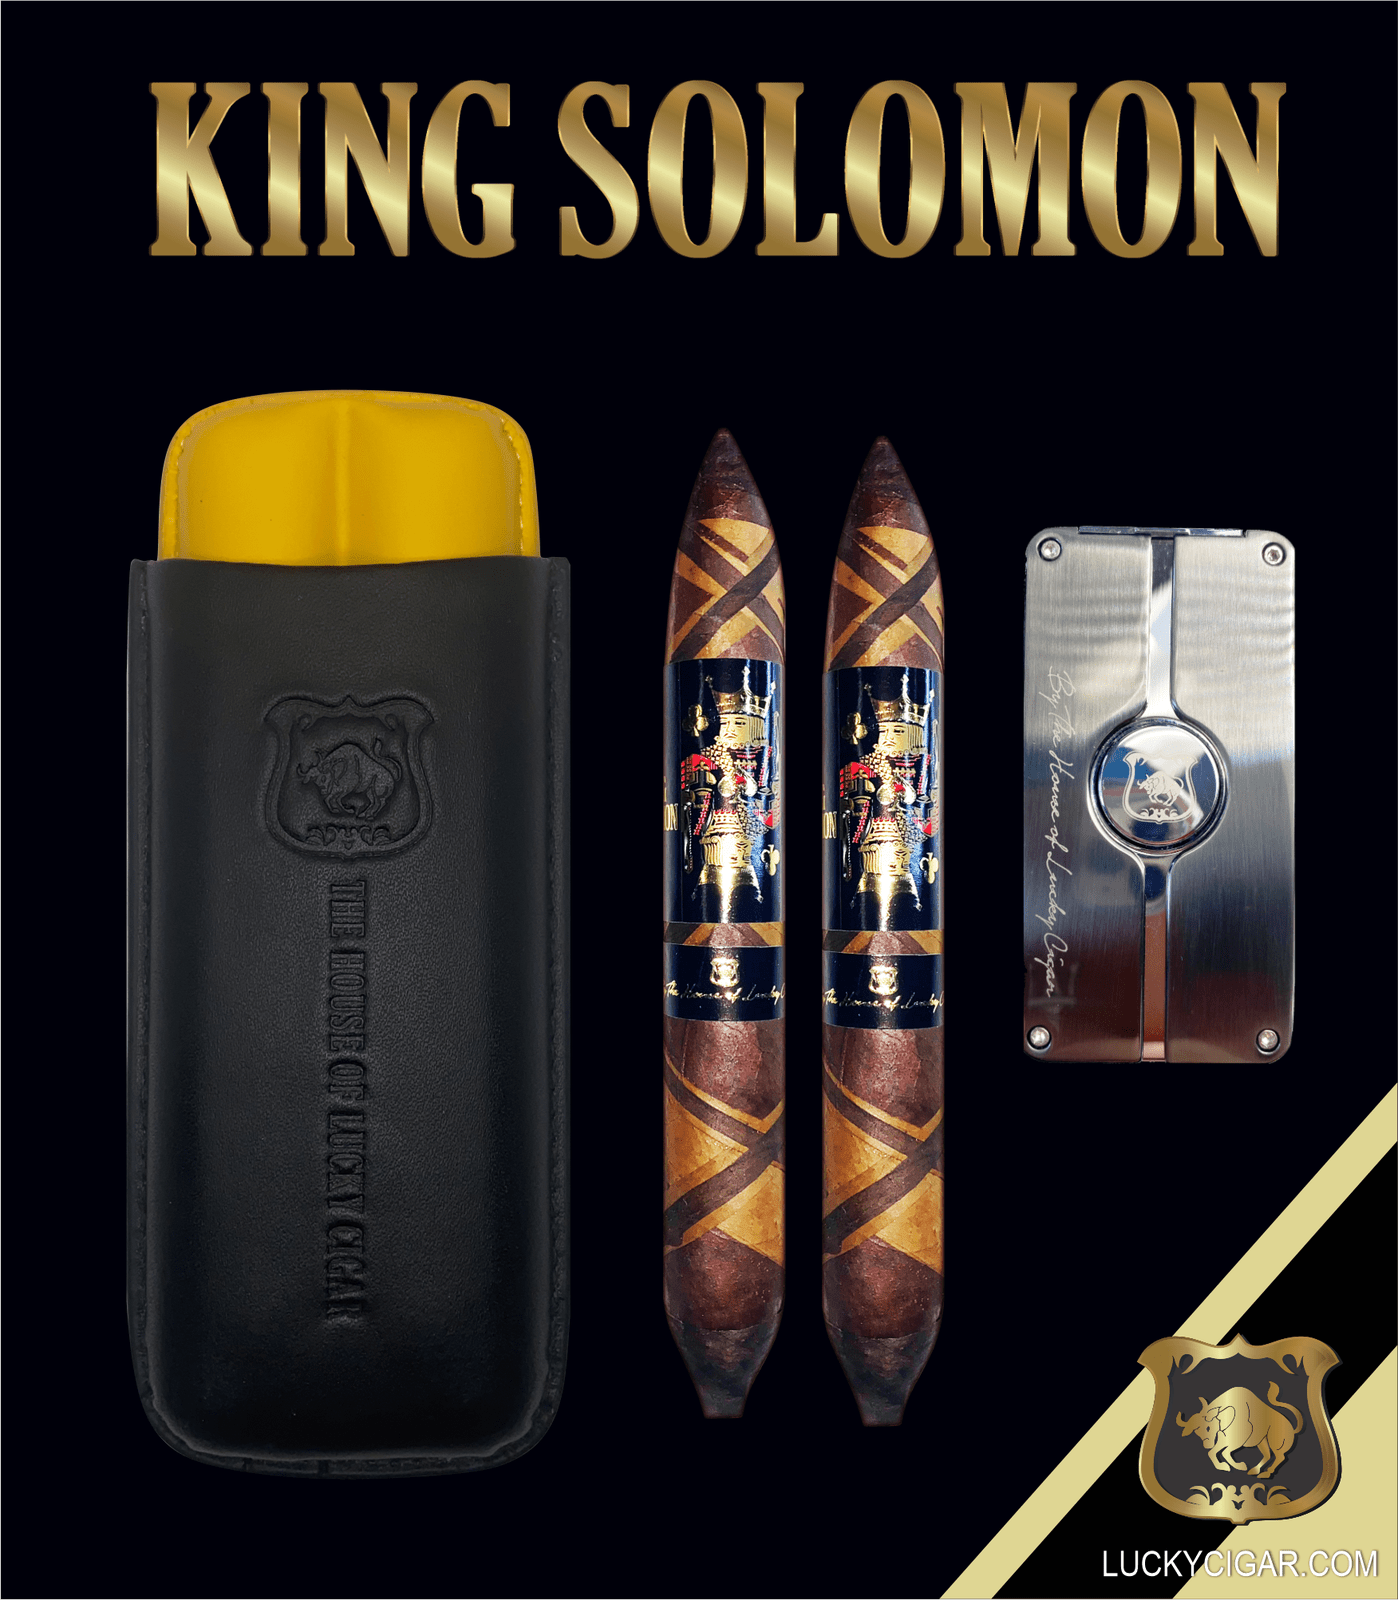 From The King Solomon Series: Set of 2 Solomon 7x60 Cigars with Torch and Humidor